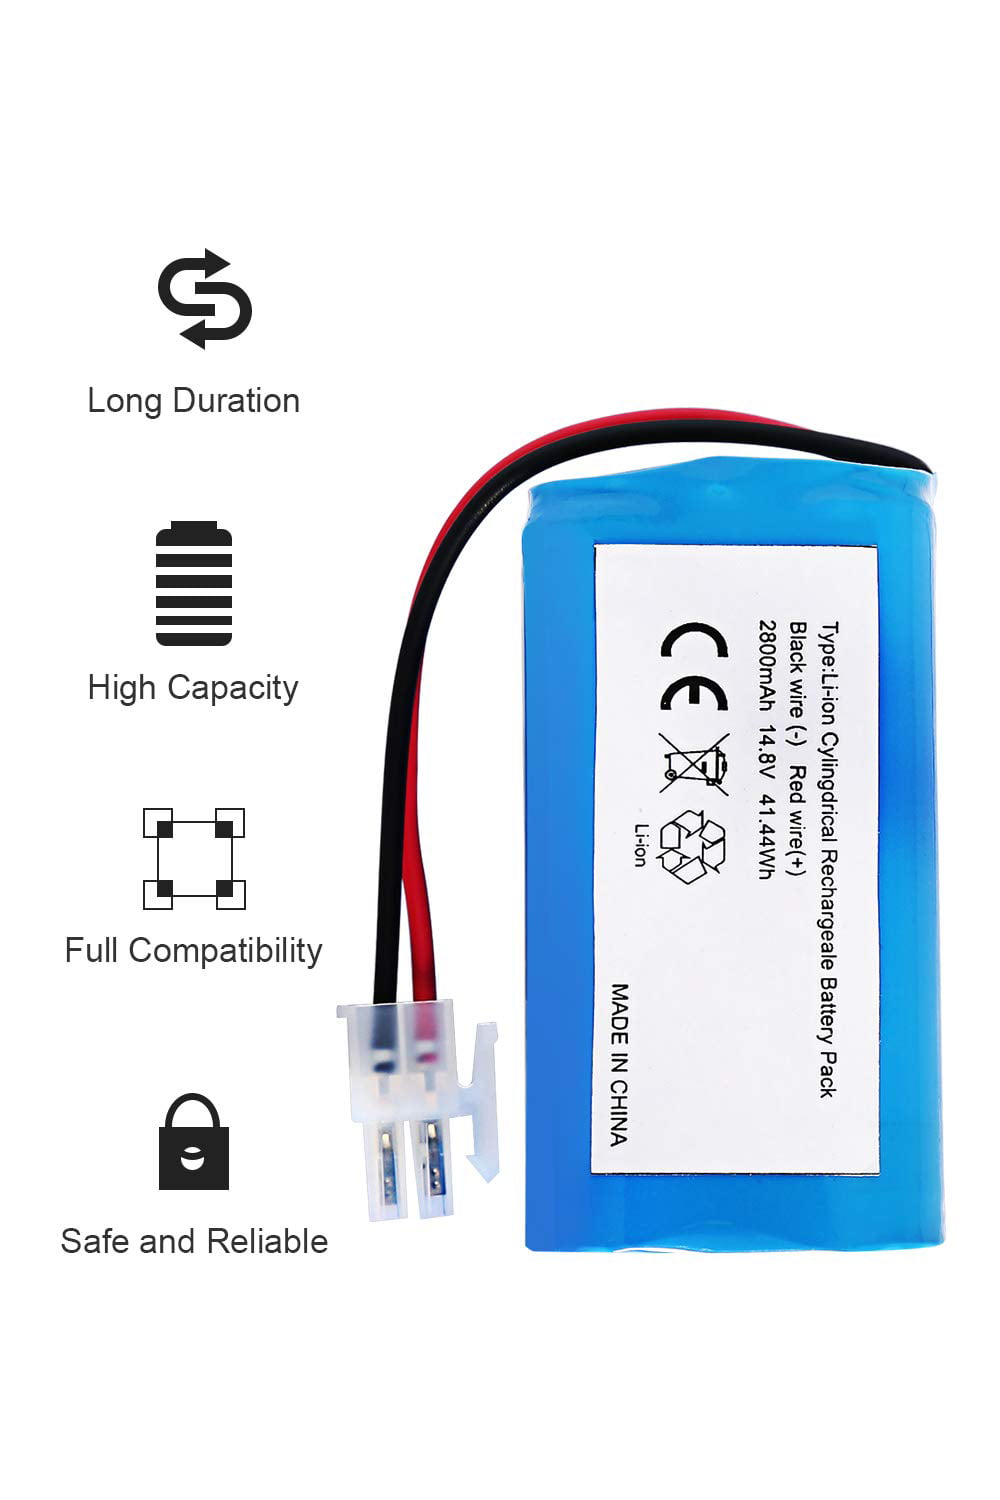 LiBatter Replacement Battery for ILIFE A4 A4S A6 V7 Robot Vacuum Cleaner 14.8V 2800mAH